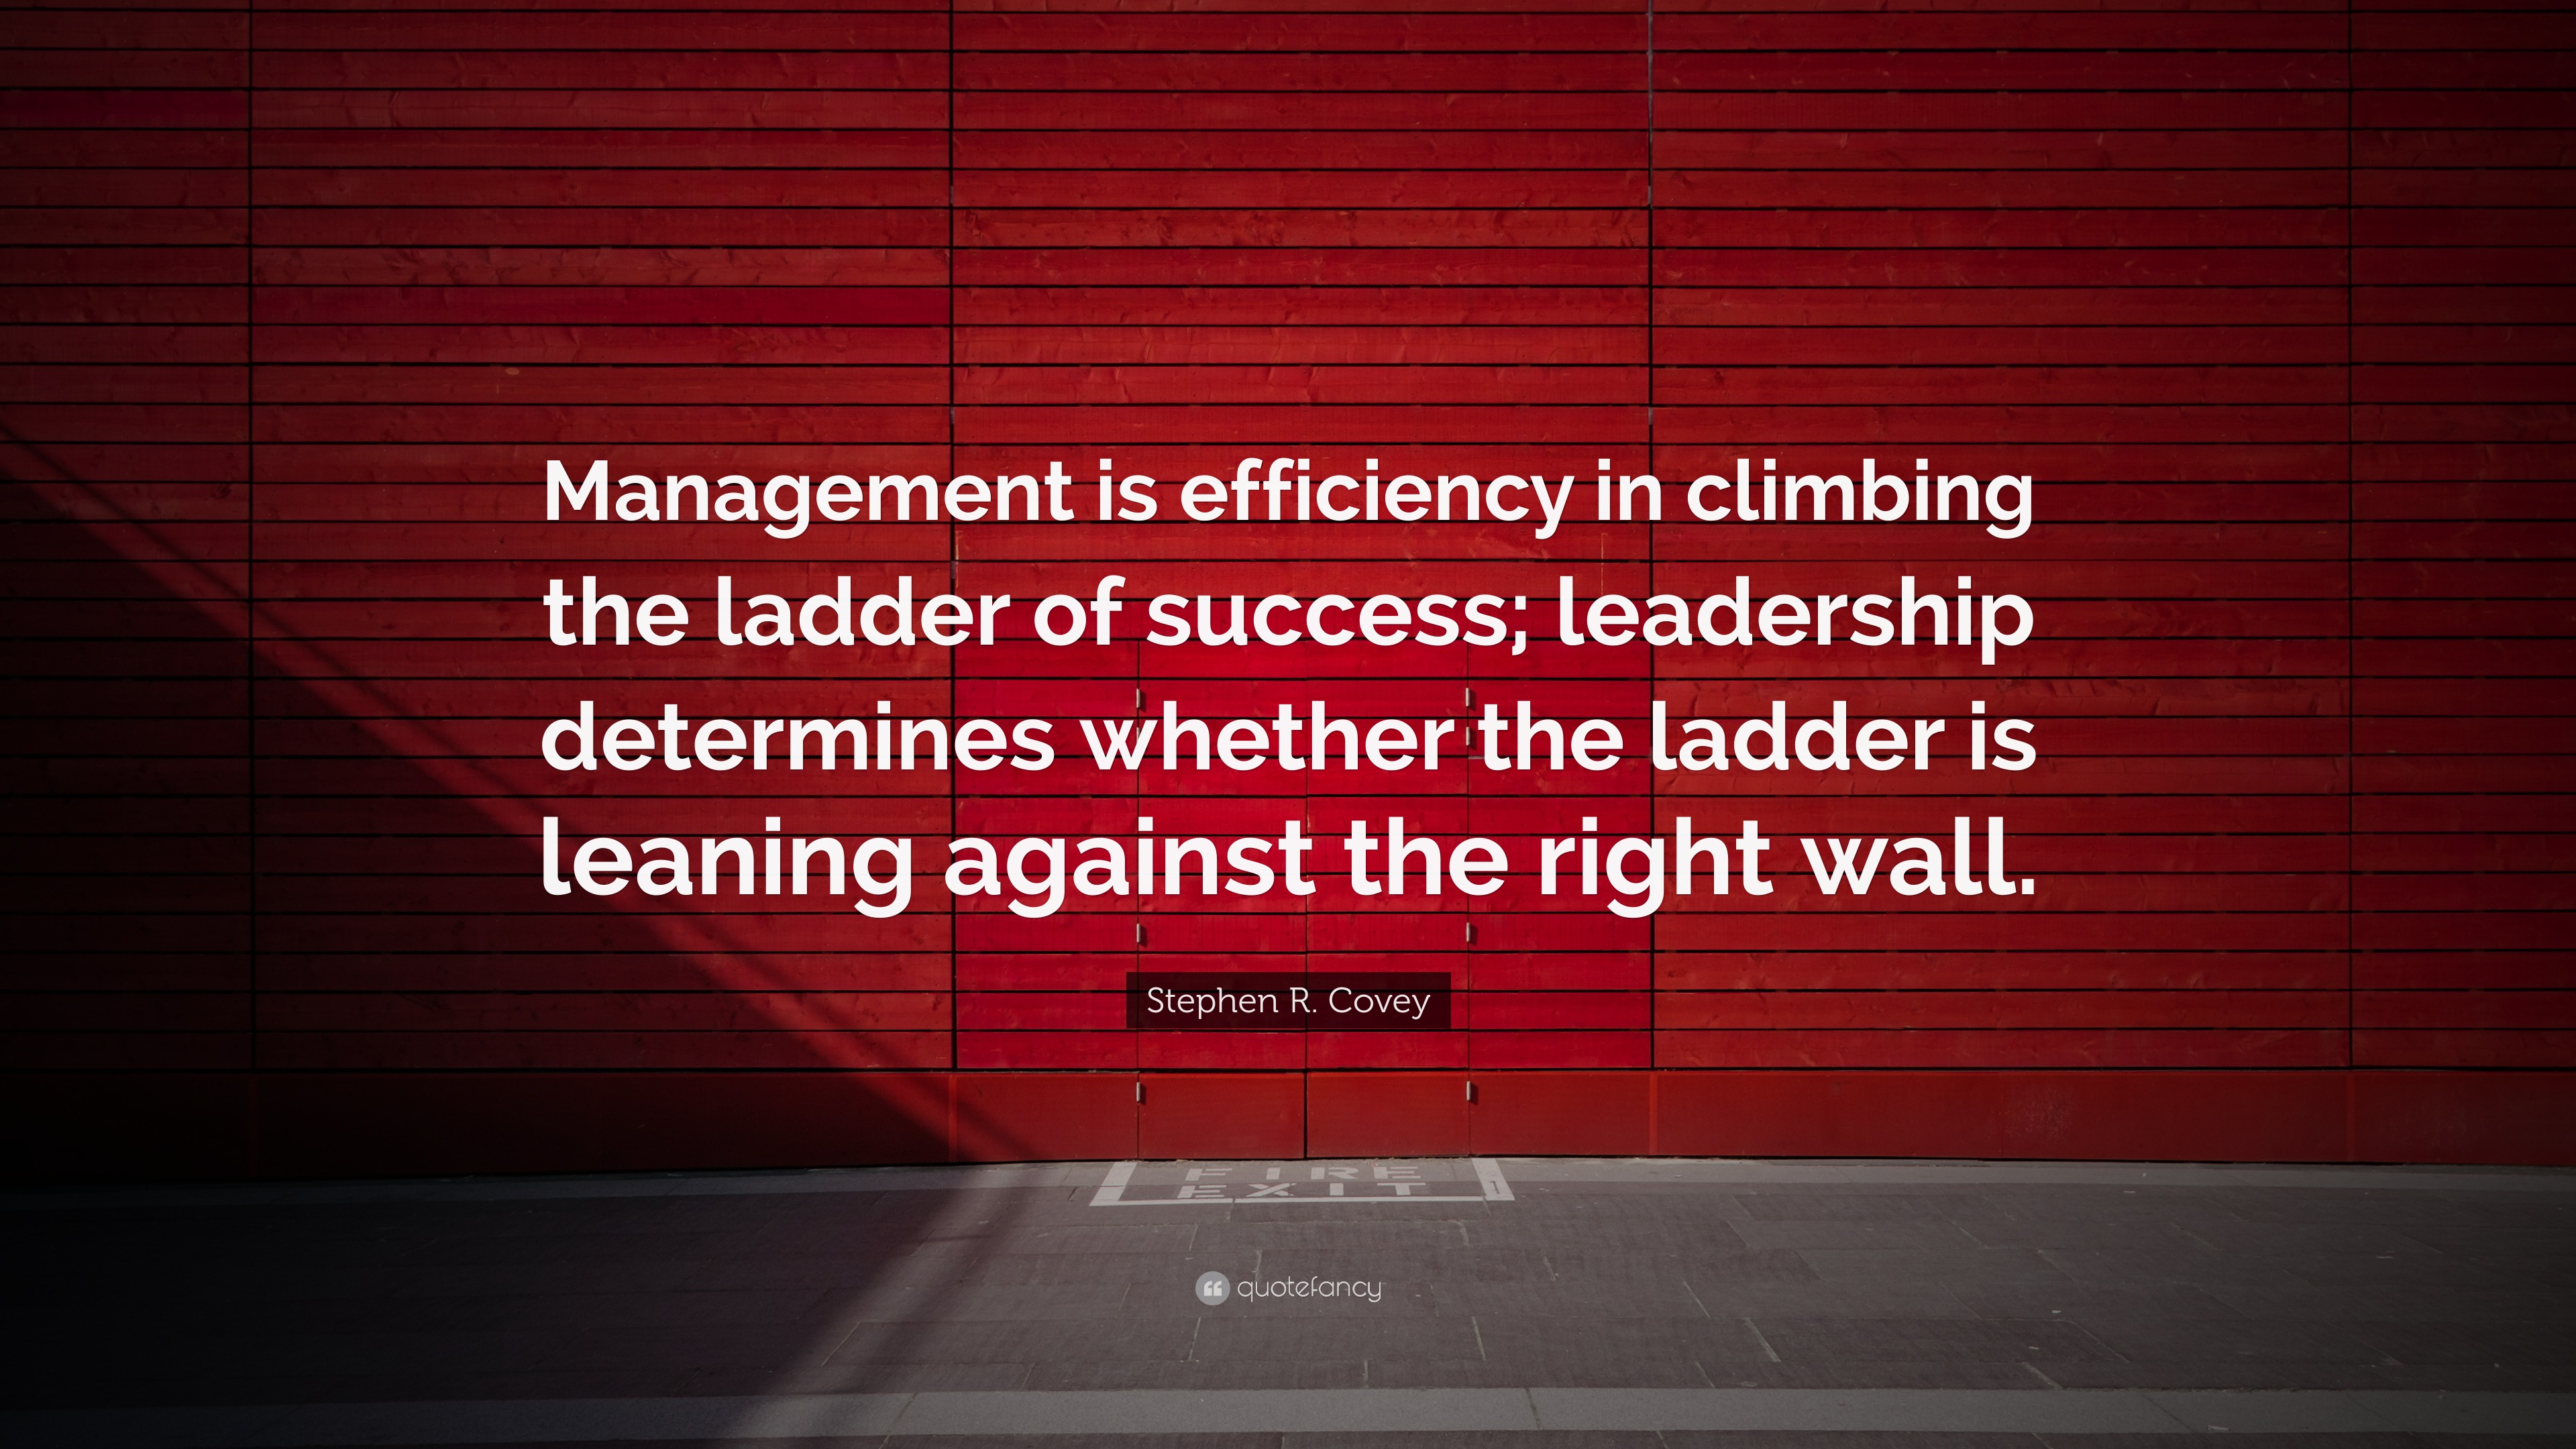 Stephen R Covey Quote Management Is Efficiency In Climbing The Ladder Of Success Leadership Determines Whether The Ladder Is Leaning Against